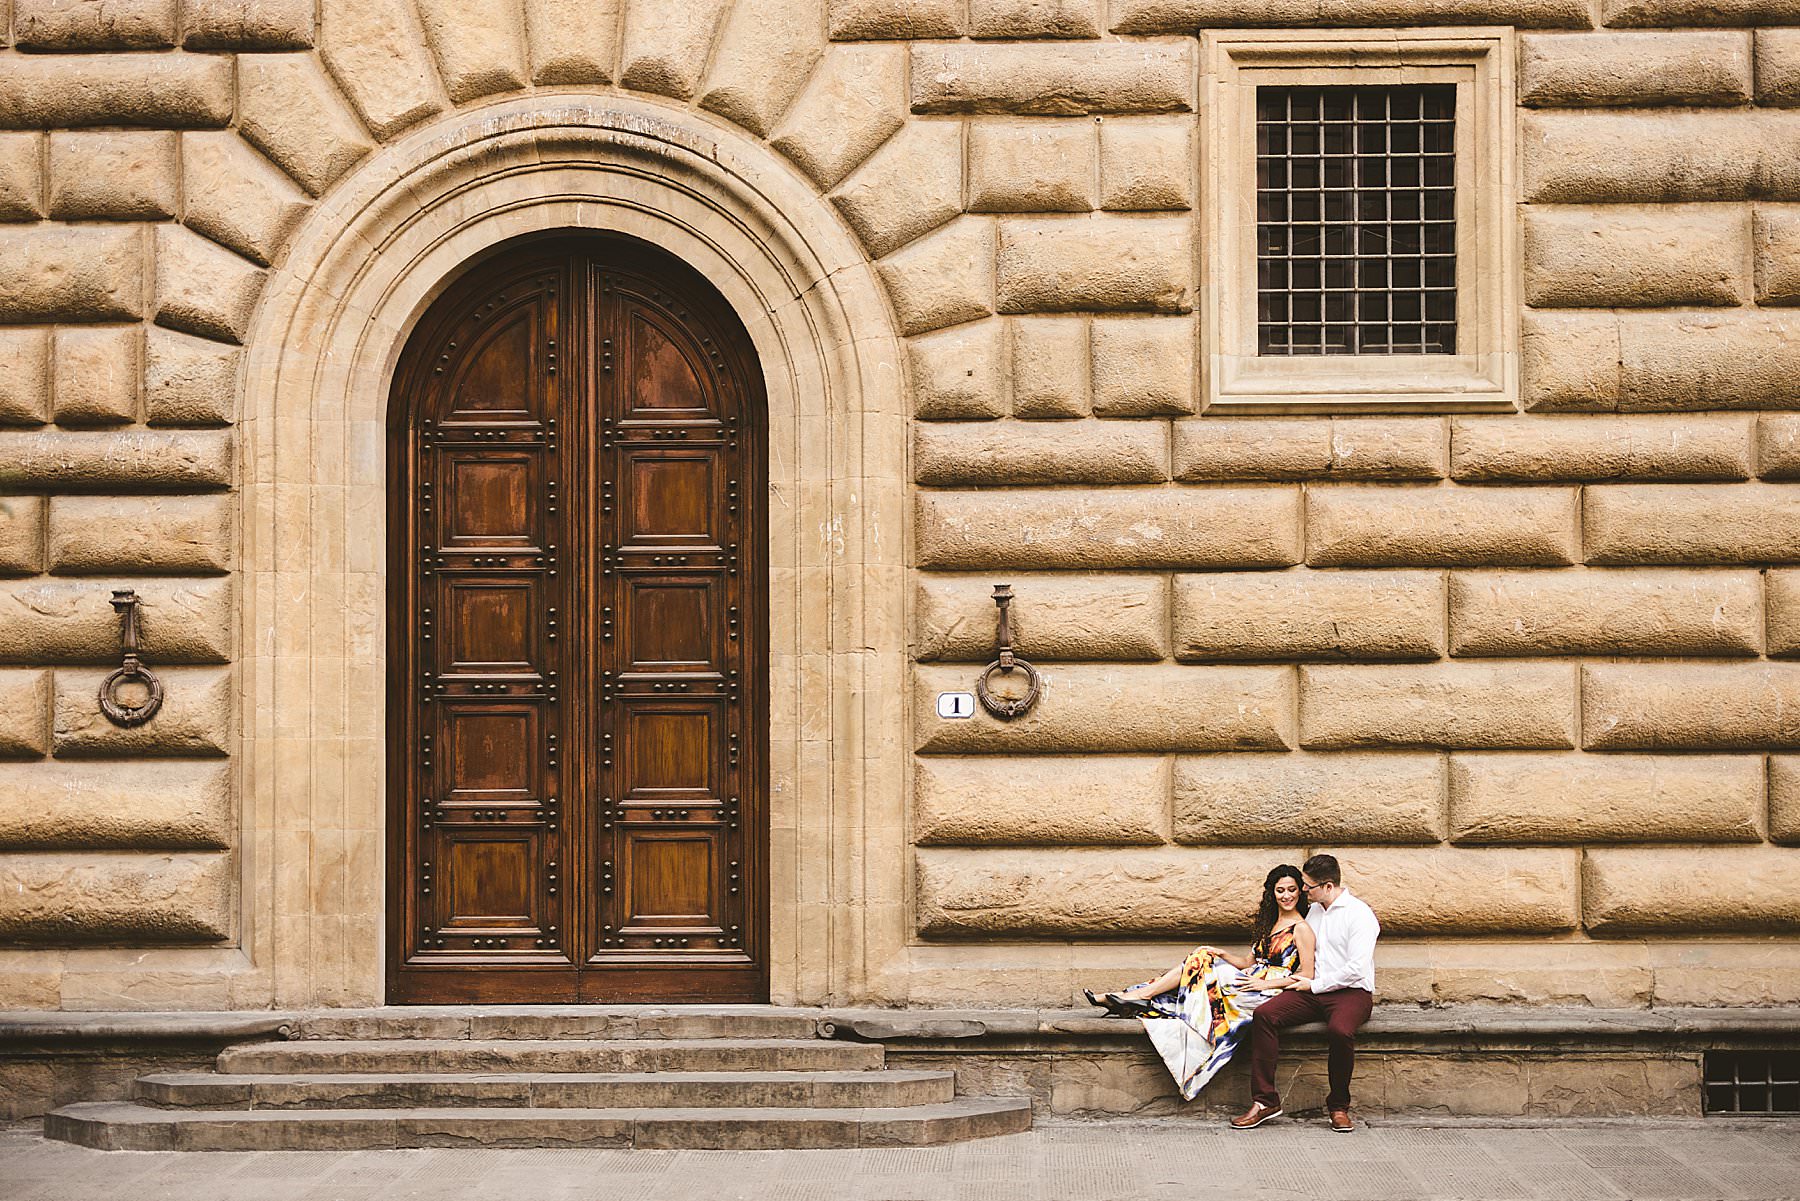 Lovely early morning couple photo session in Florence near Palazzo Gondi and Palazzo Vecchio